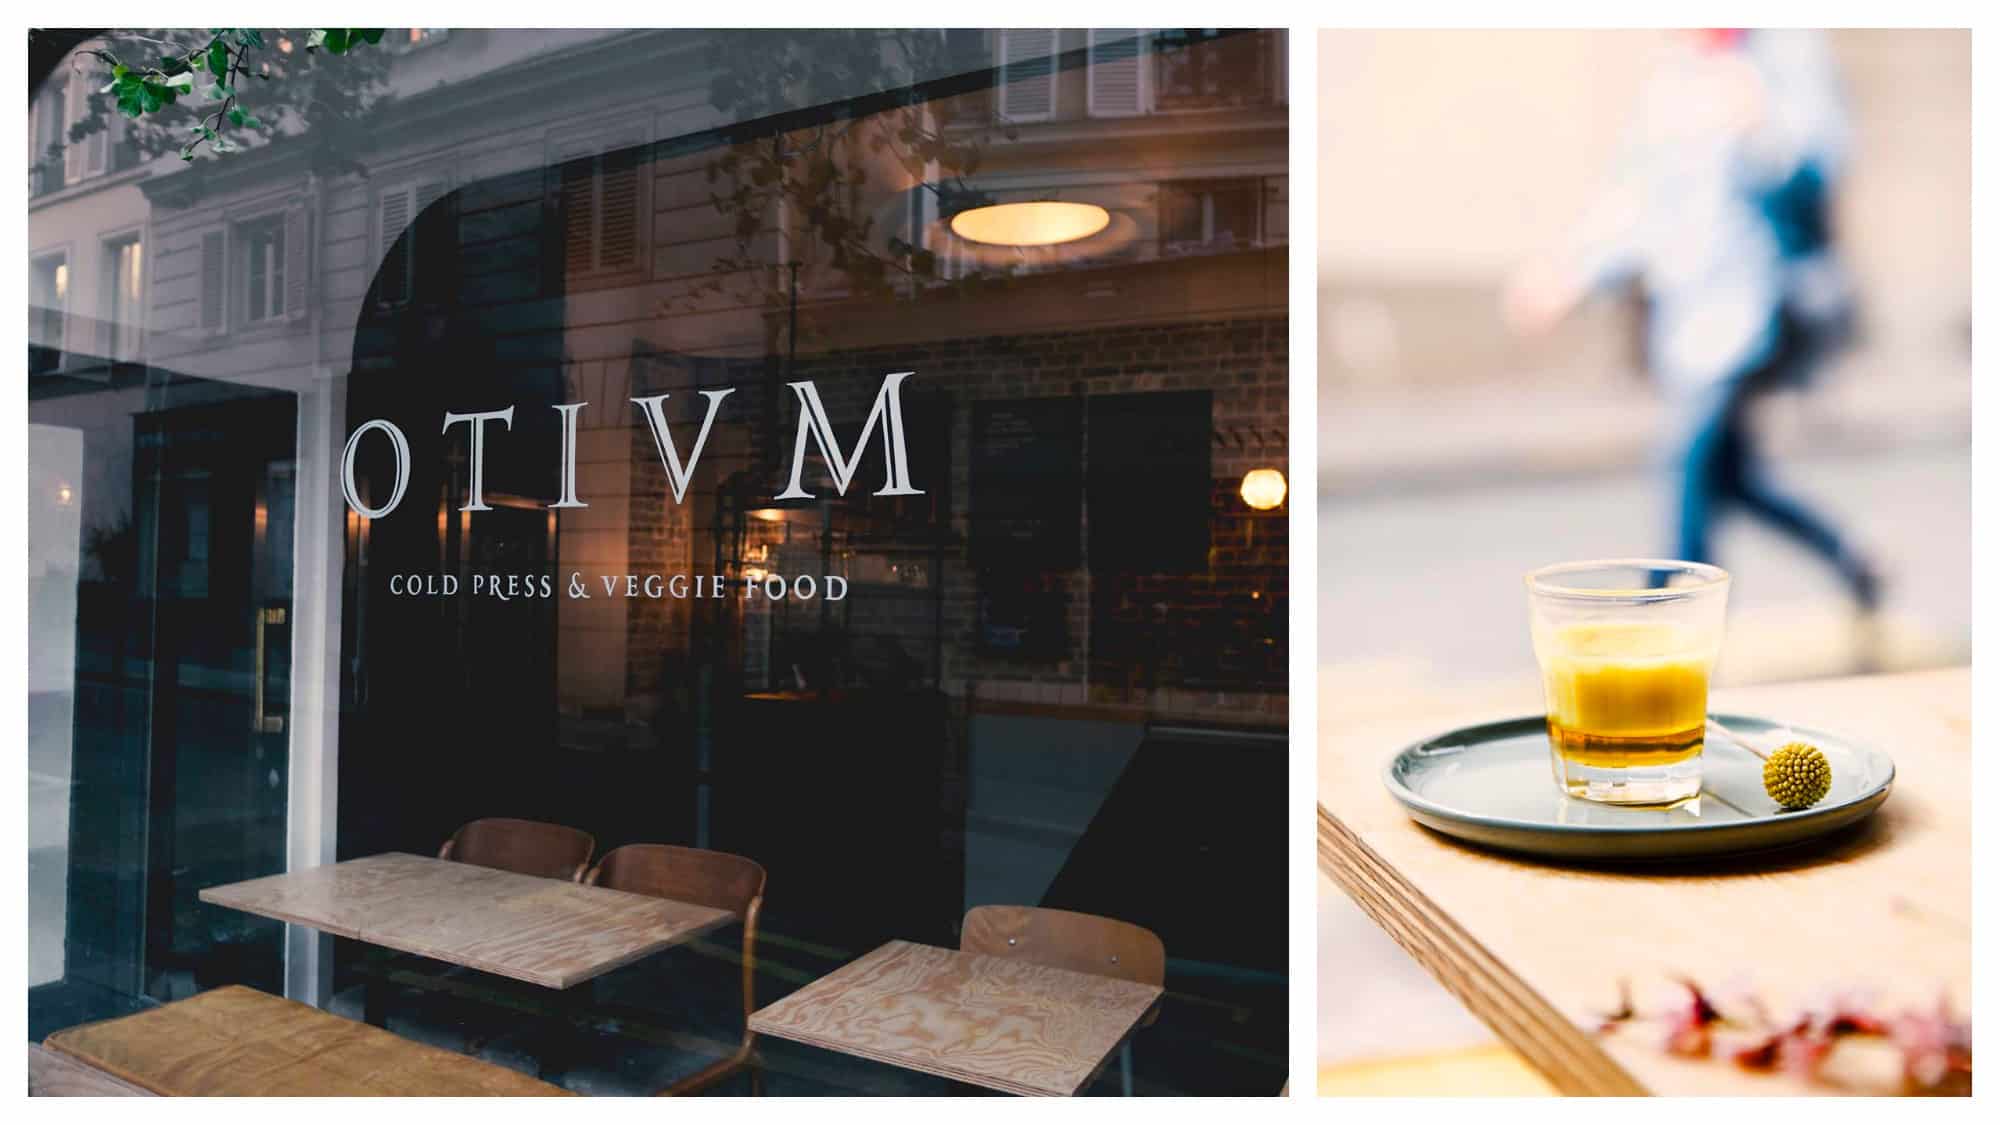 The window at Otium café (left) which specializes in cold-pressed juices (right).